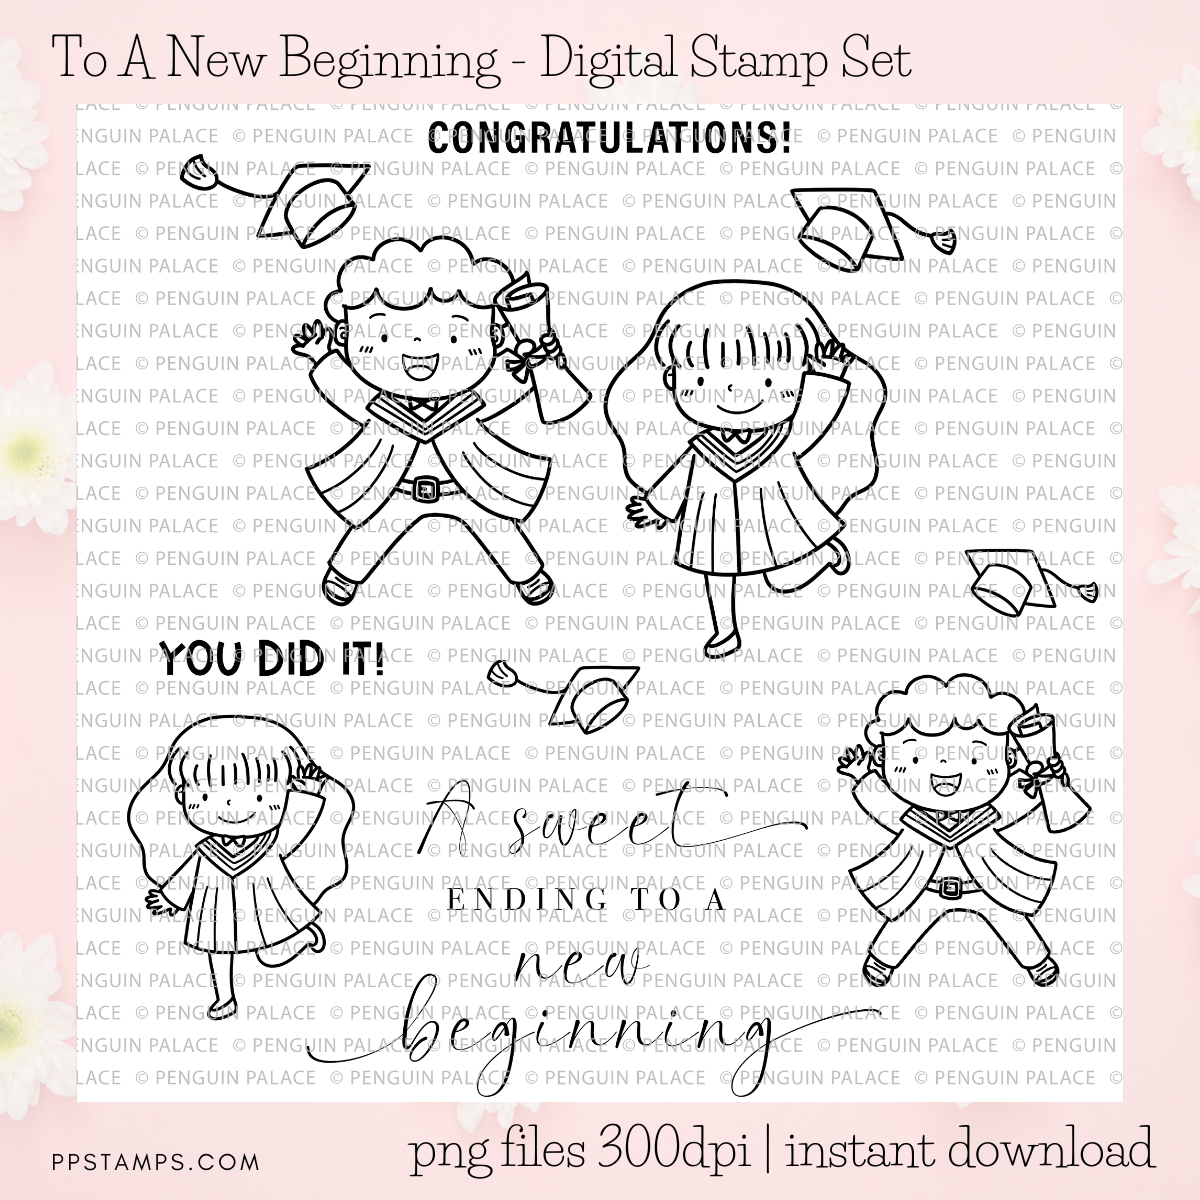 To A New Beginning - Digital Stamp